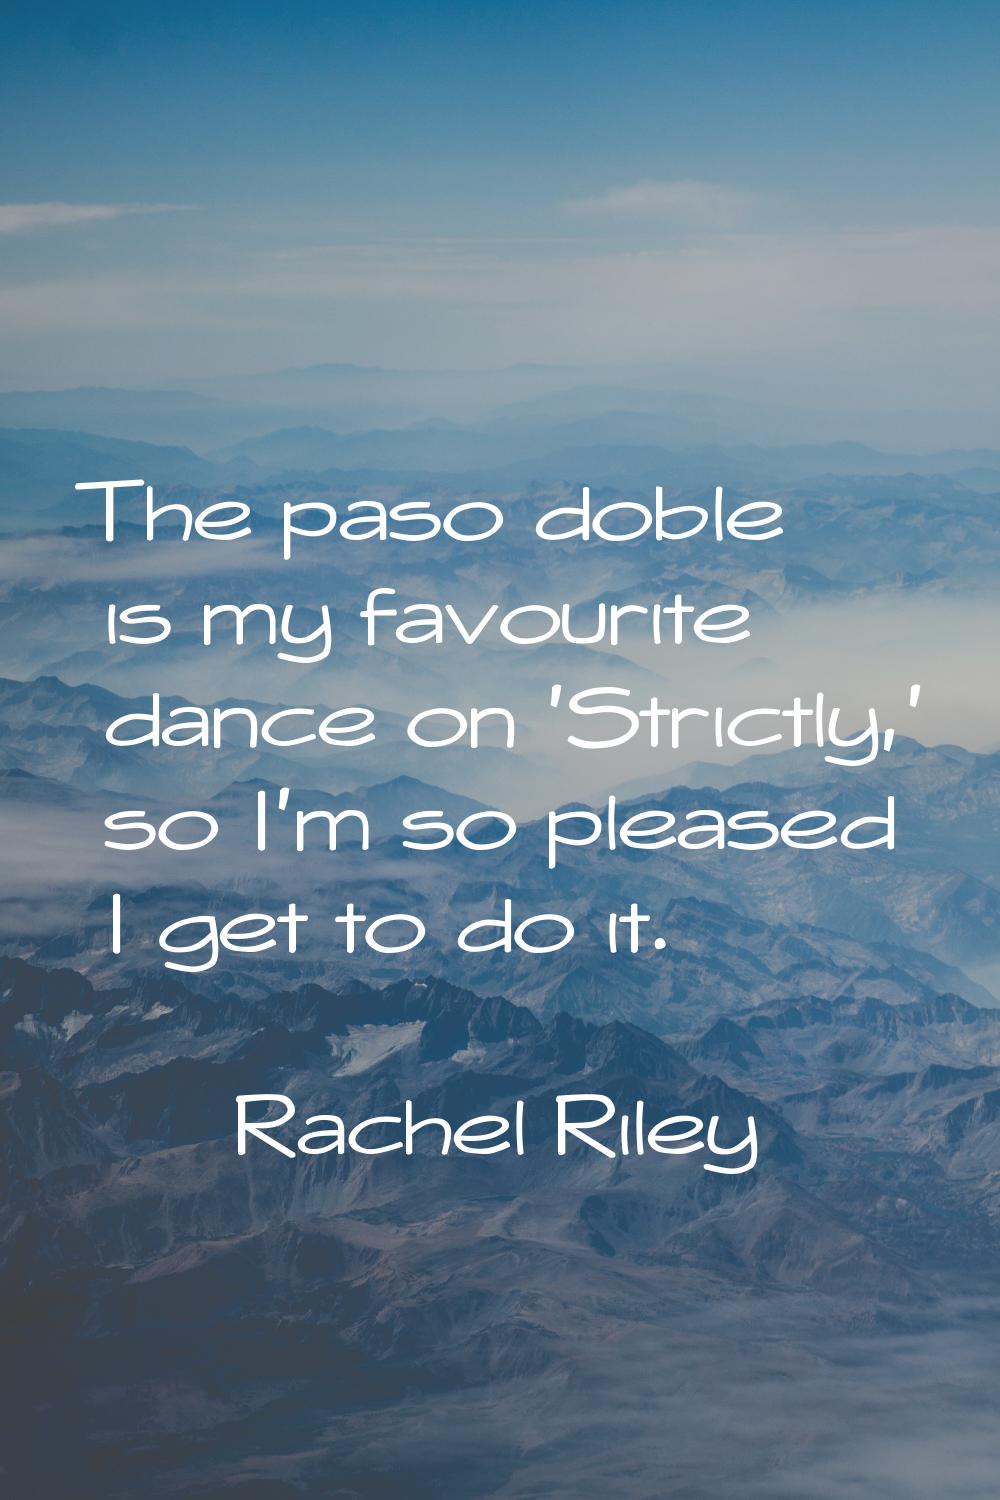 The paso doble is my favourite dance on 'Strictly,' so I'm so pleased I get to do it.